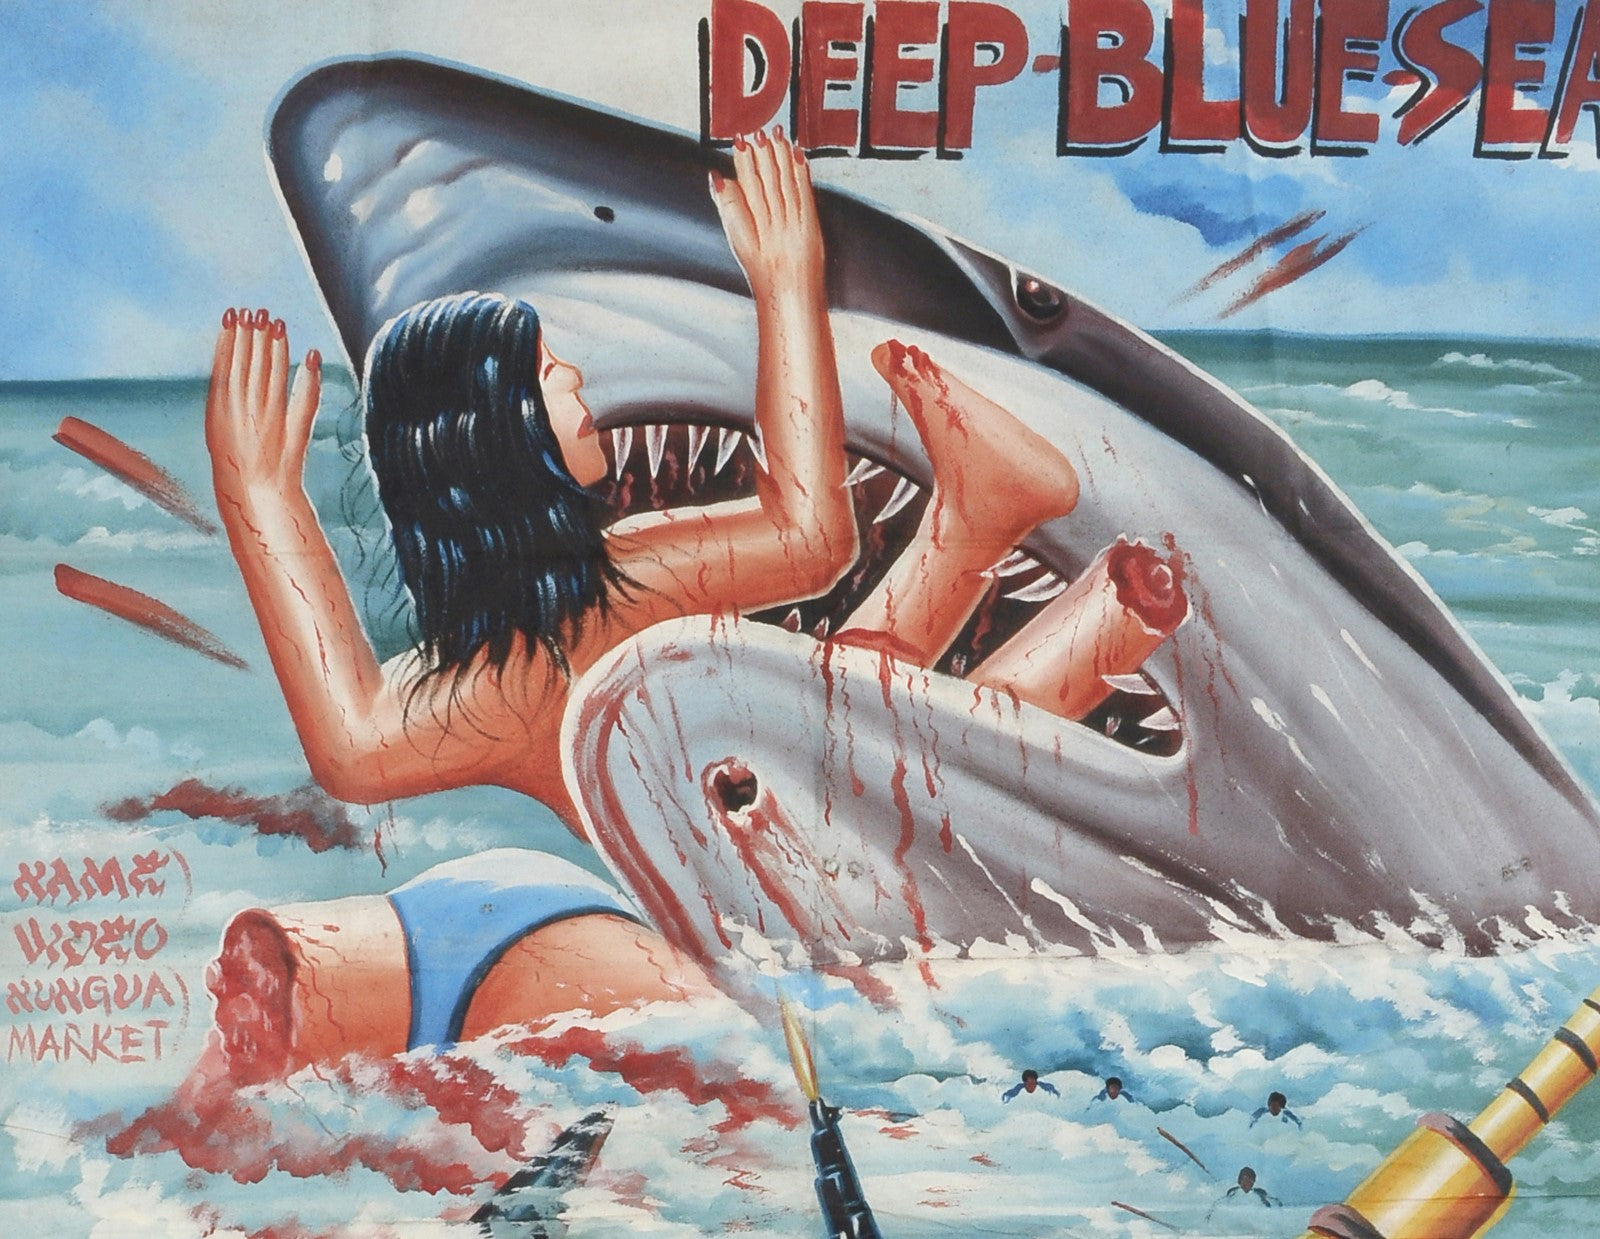 DEEP BLUE SEA MOVIE POSTER HAND PAINTED IN GHANA FOR THE LOCAL CINEMA DETAILS